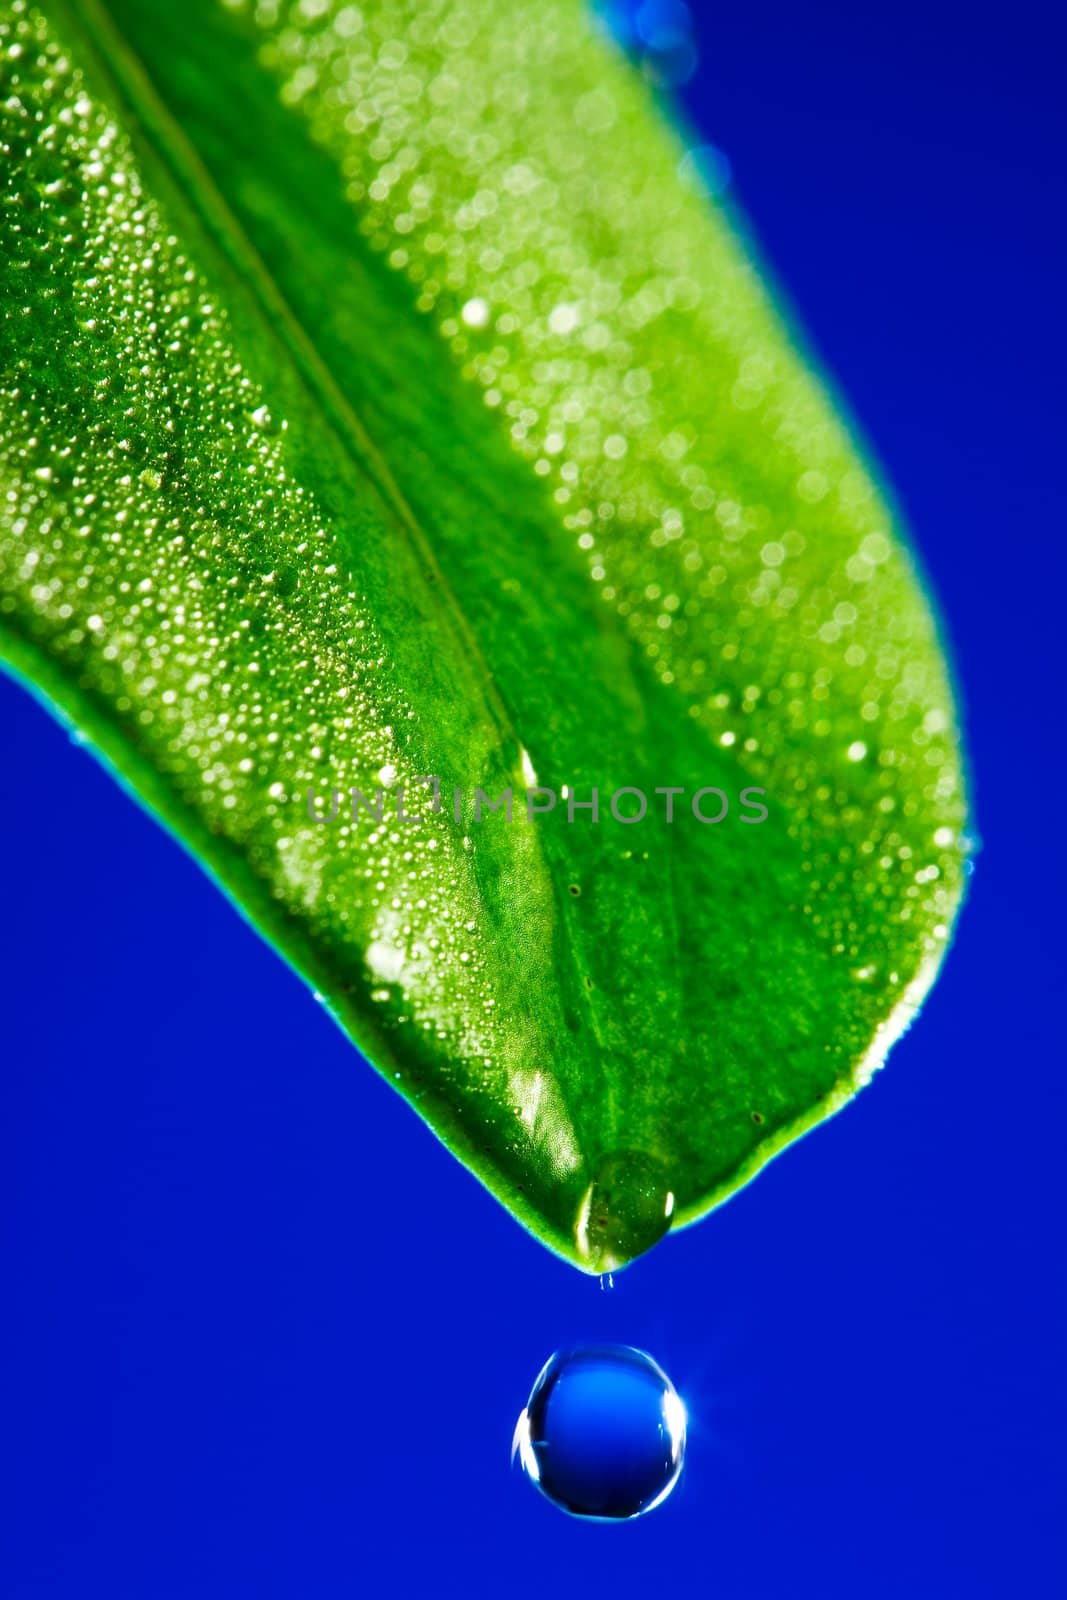 Shining leaf after a rain by Gravicapa